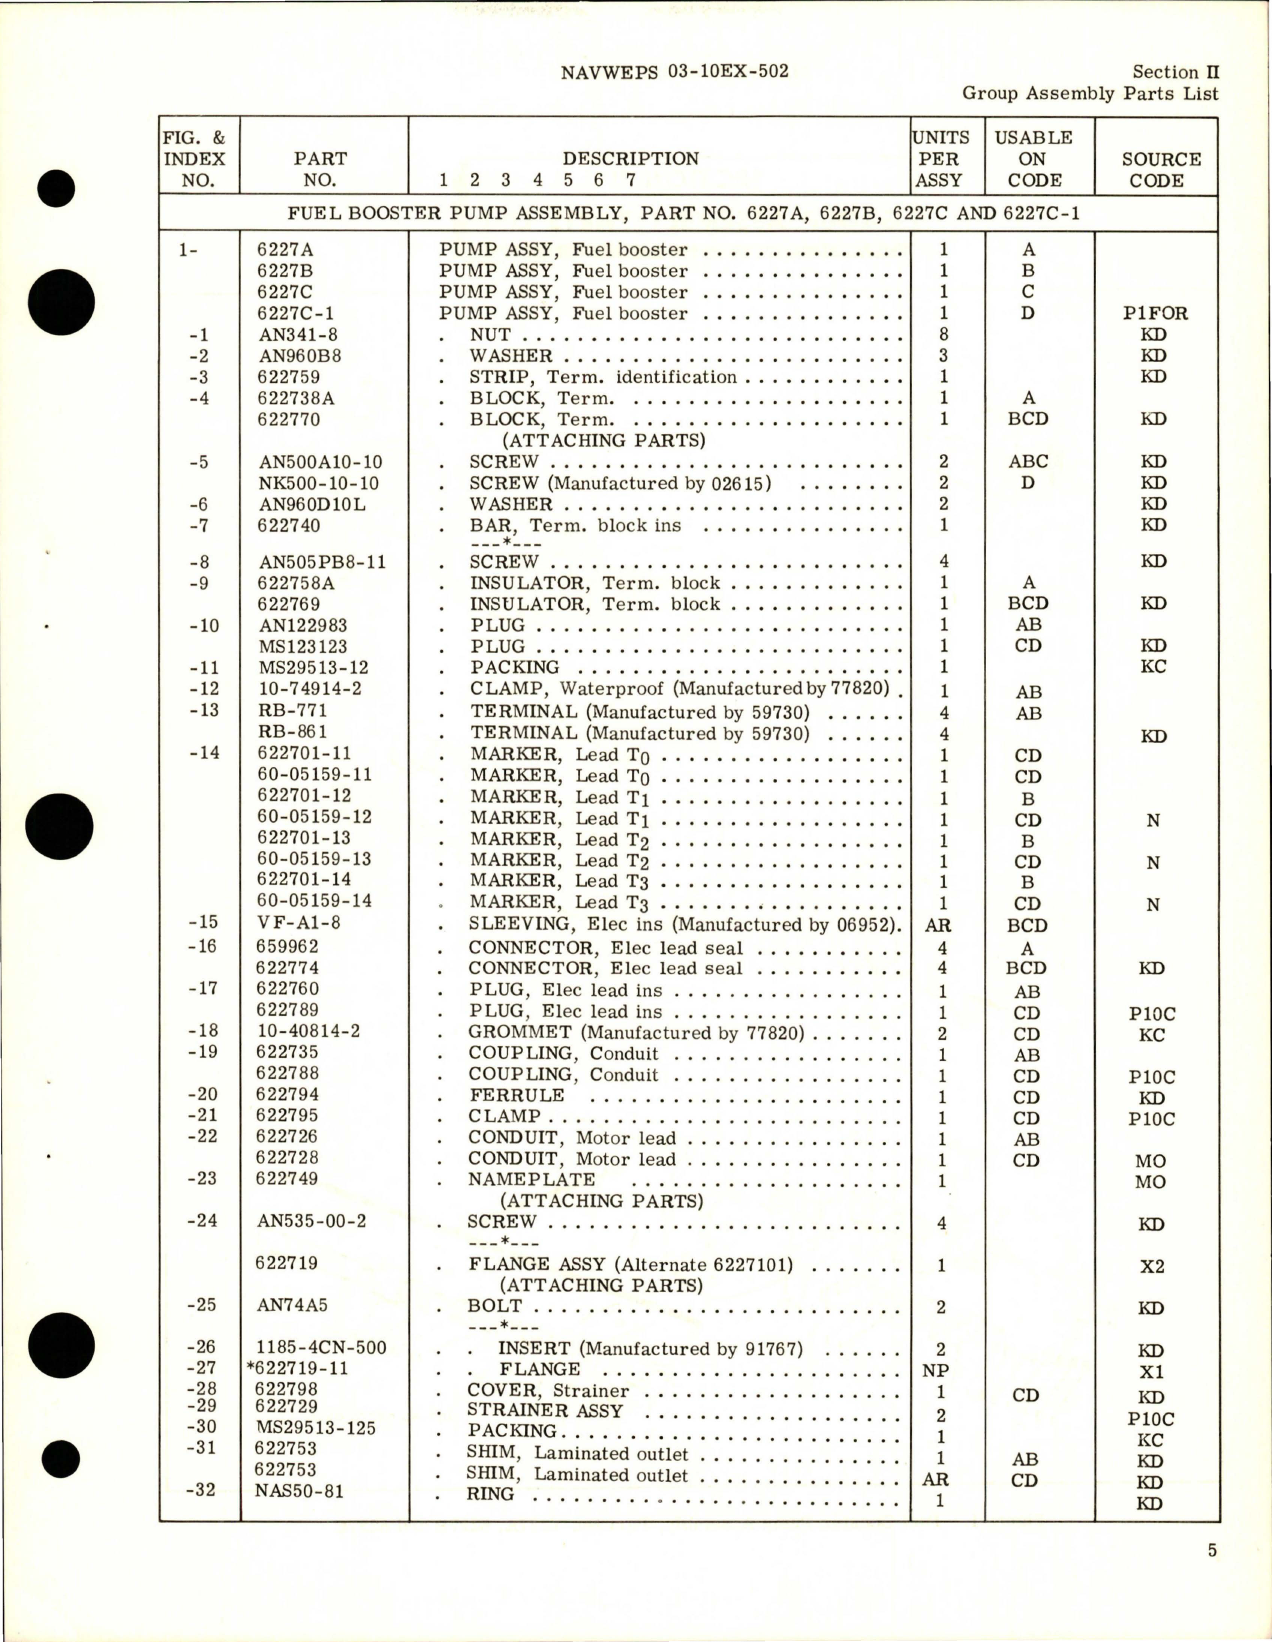 Sample page 7 from AirCorps Library document: Illustrated Parts Breakdown for Fuel Booster Pump